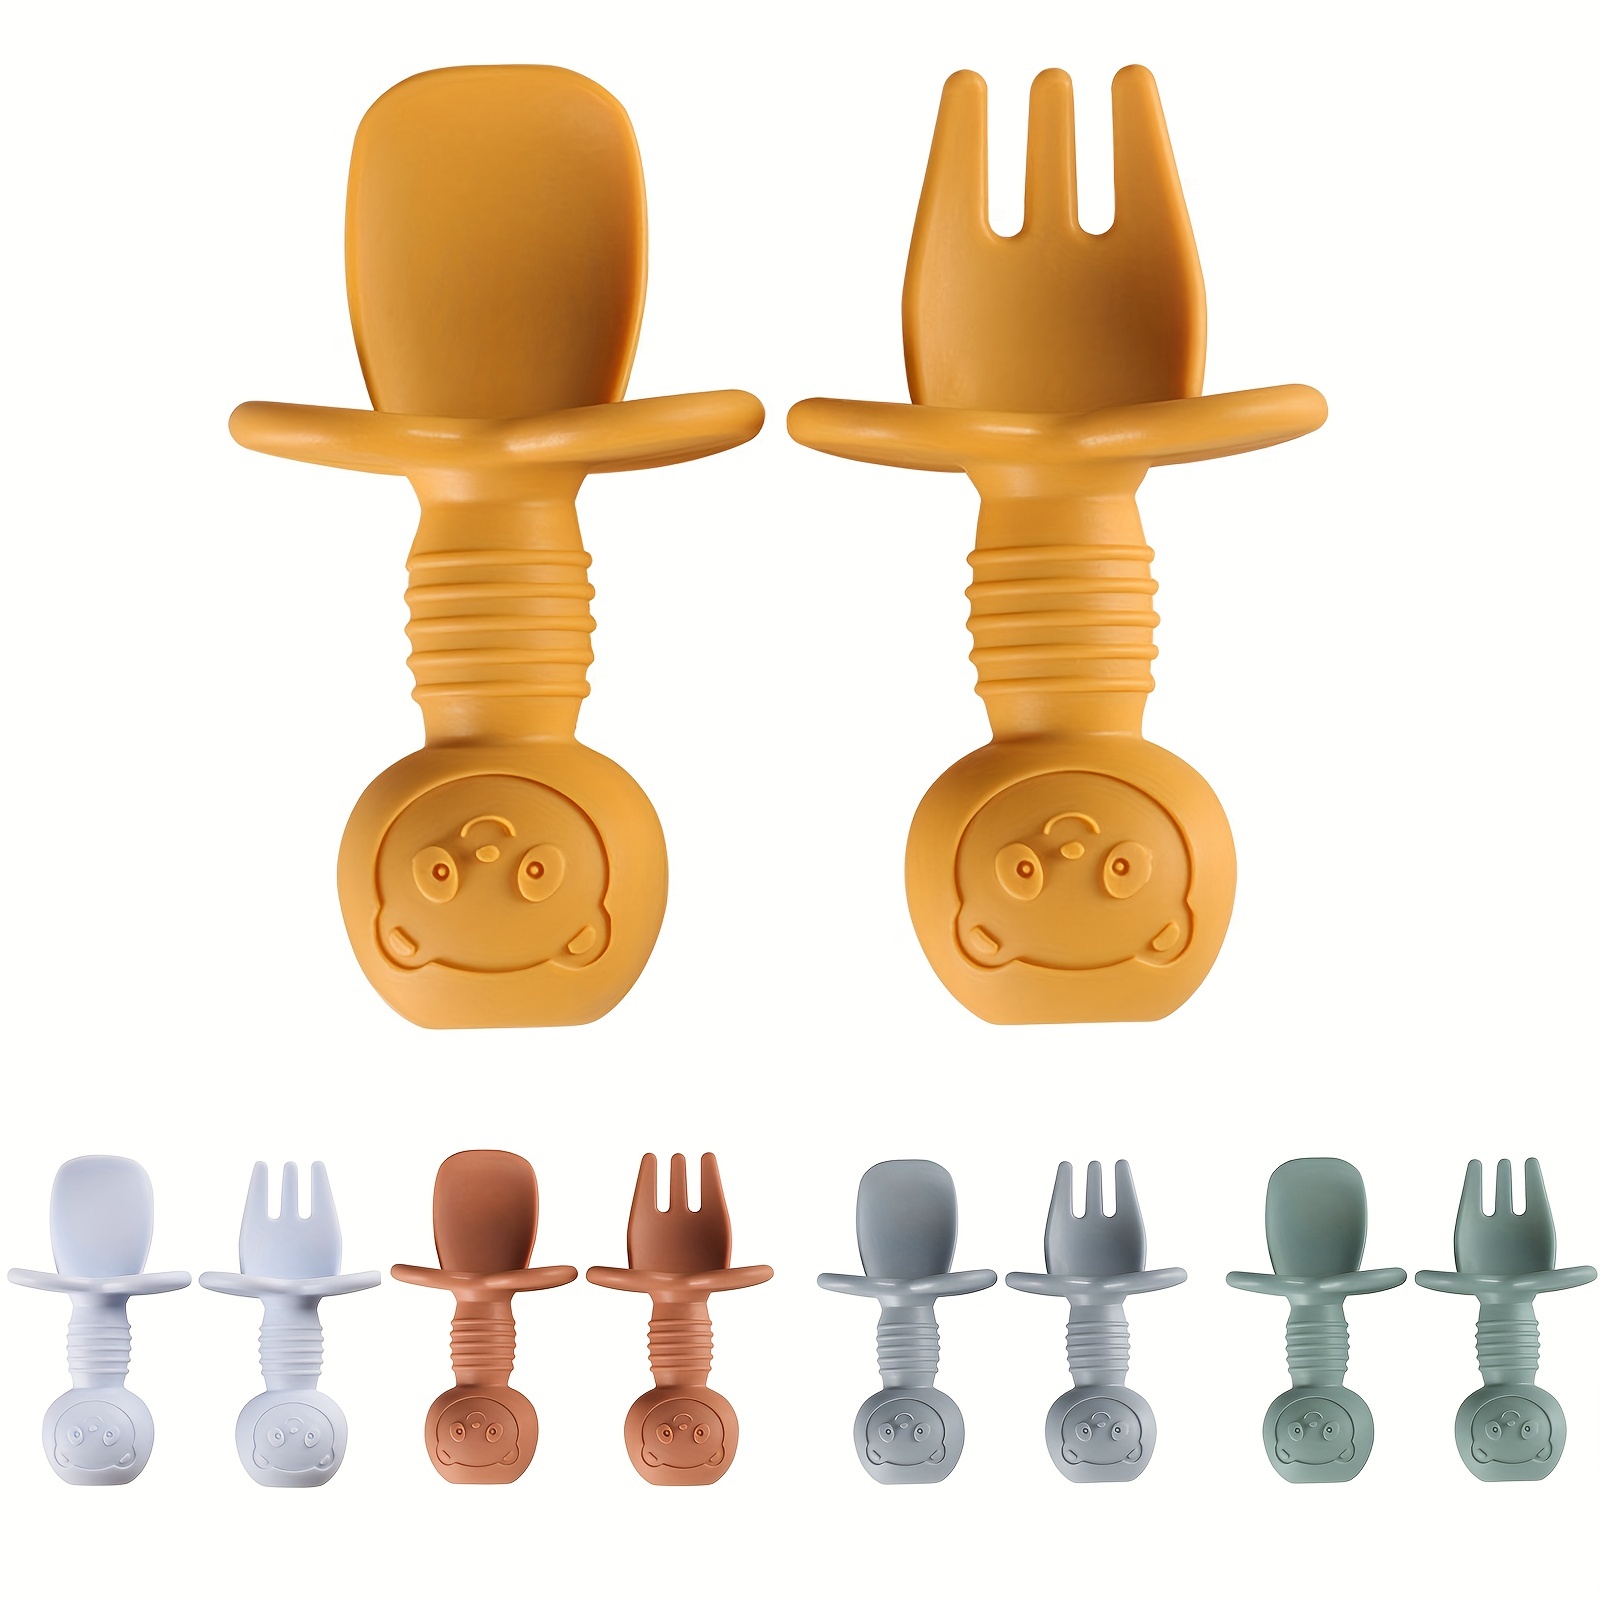 BOLOLO Baby and Toddler Self-Feeding Forks and Spoons set